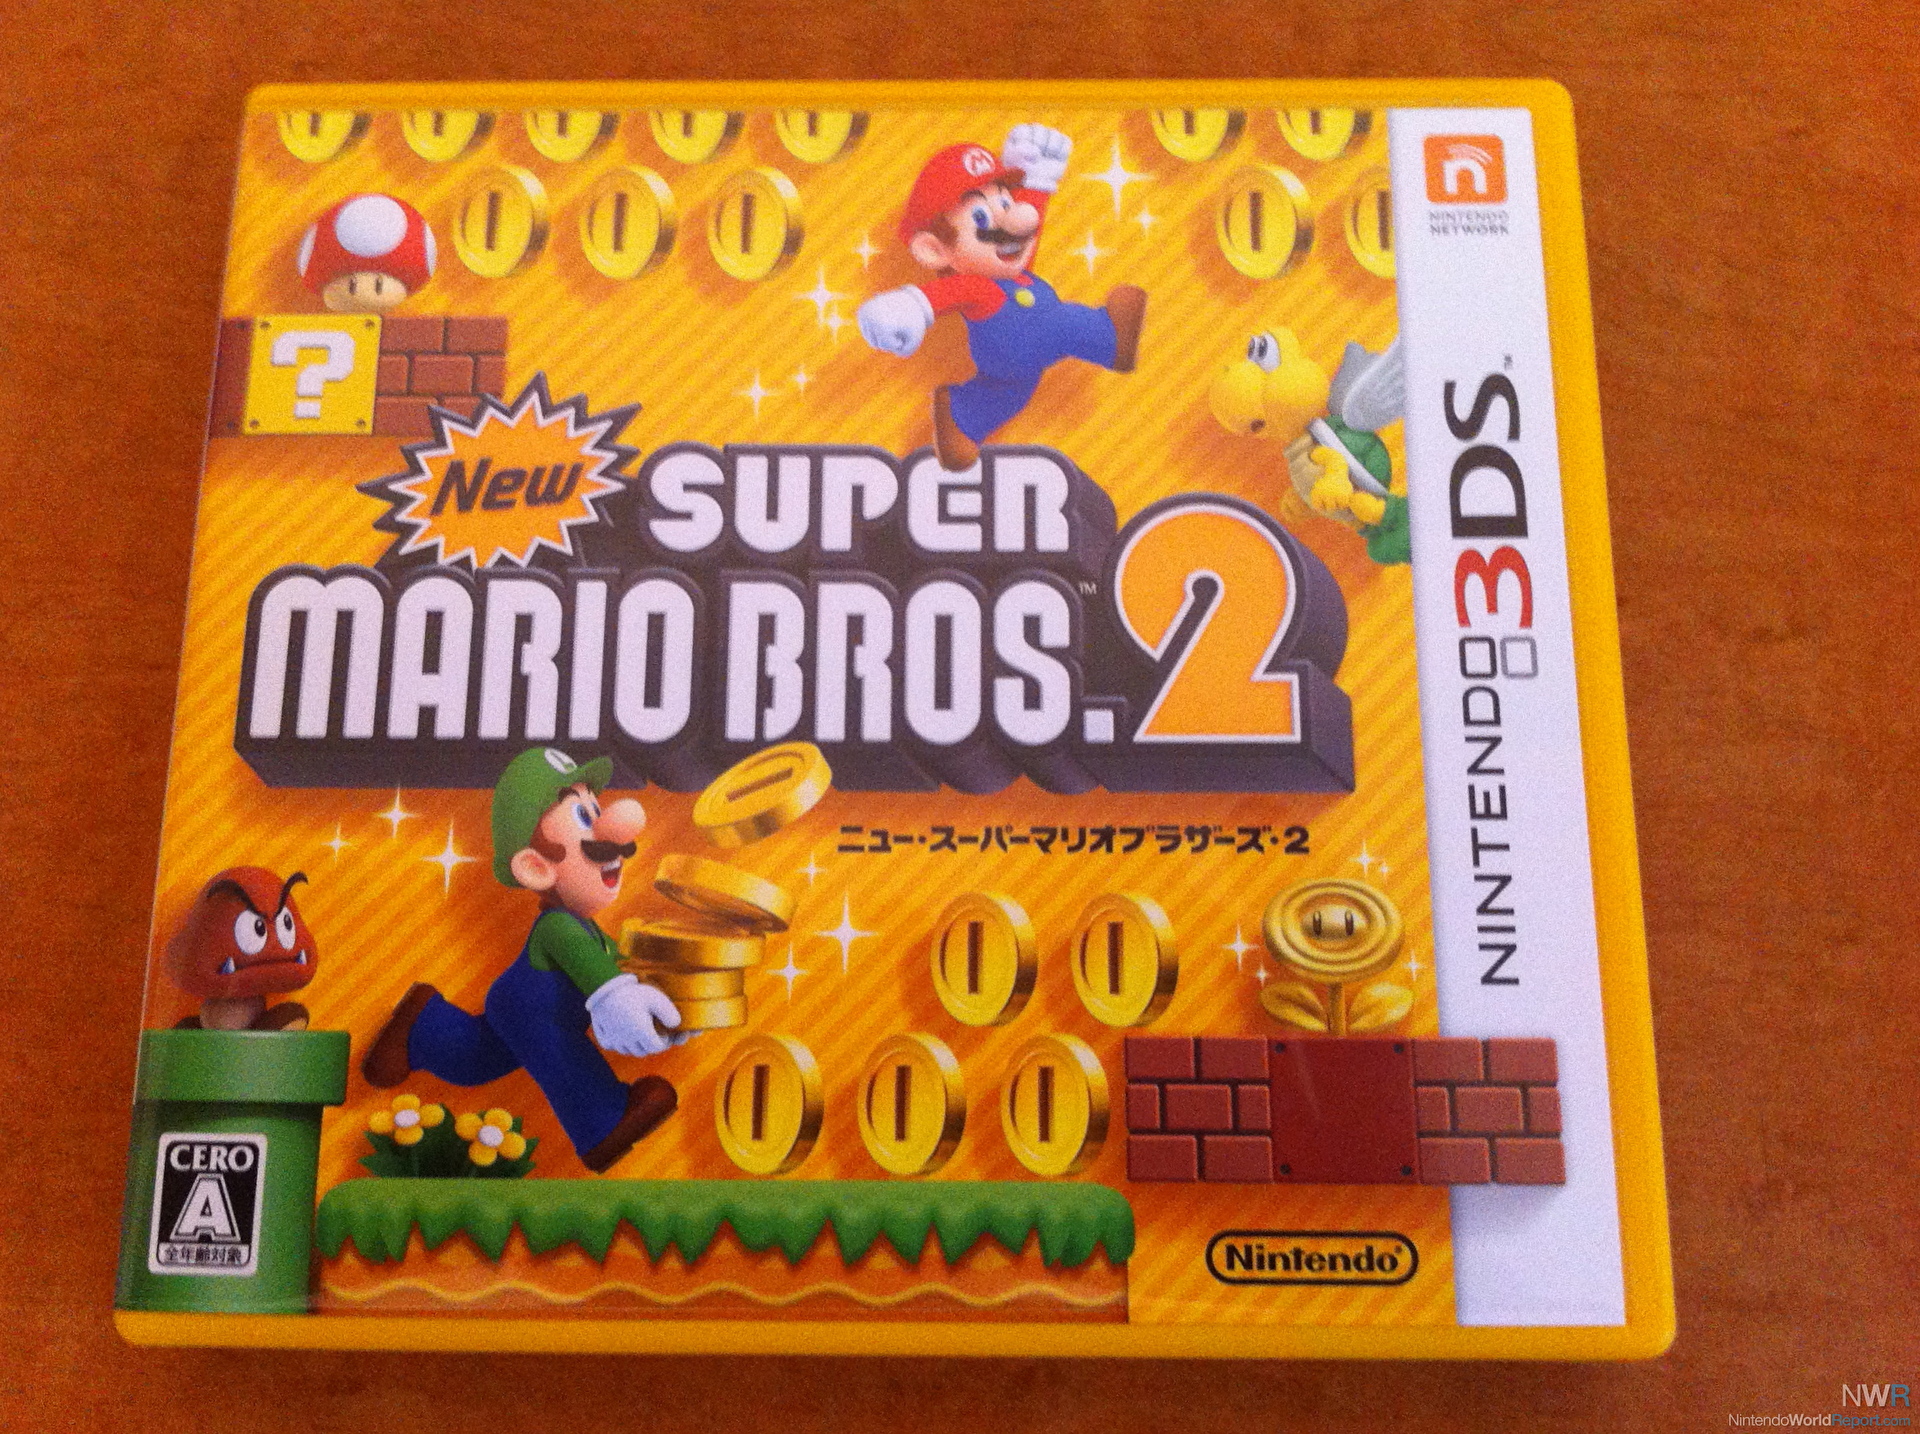 is new super mario bros 2 3ds new?